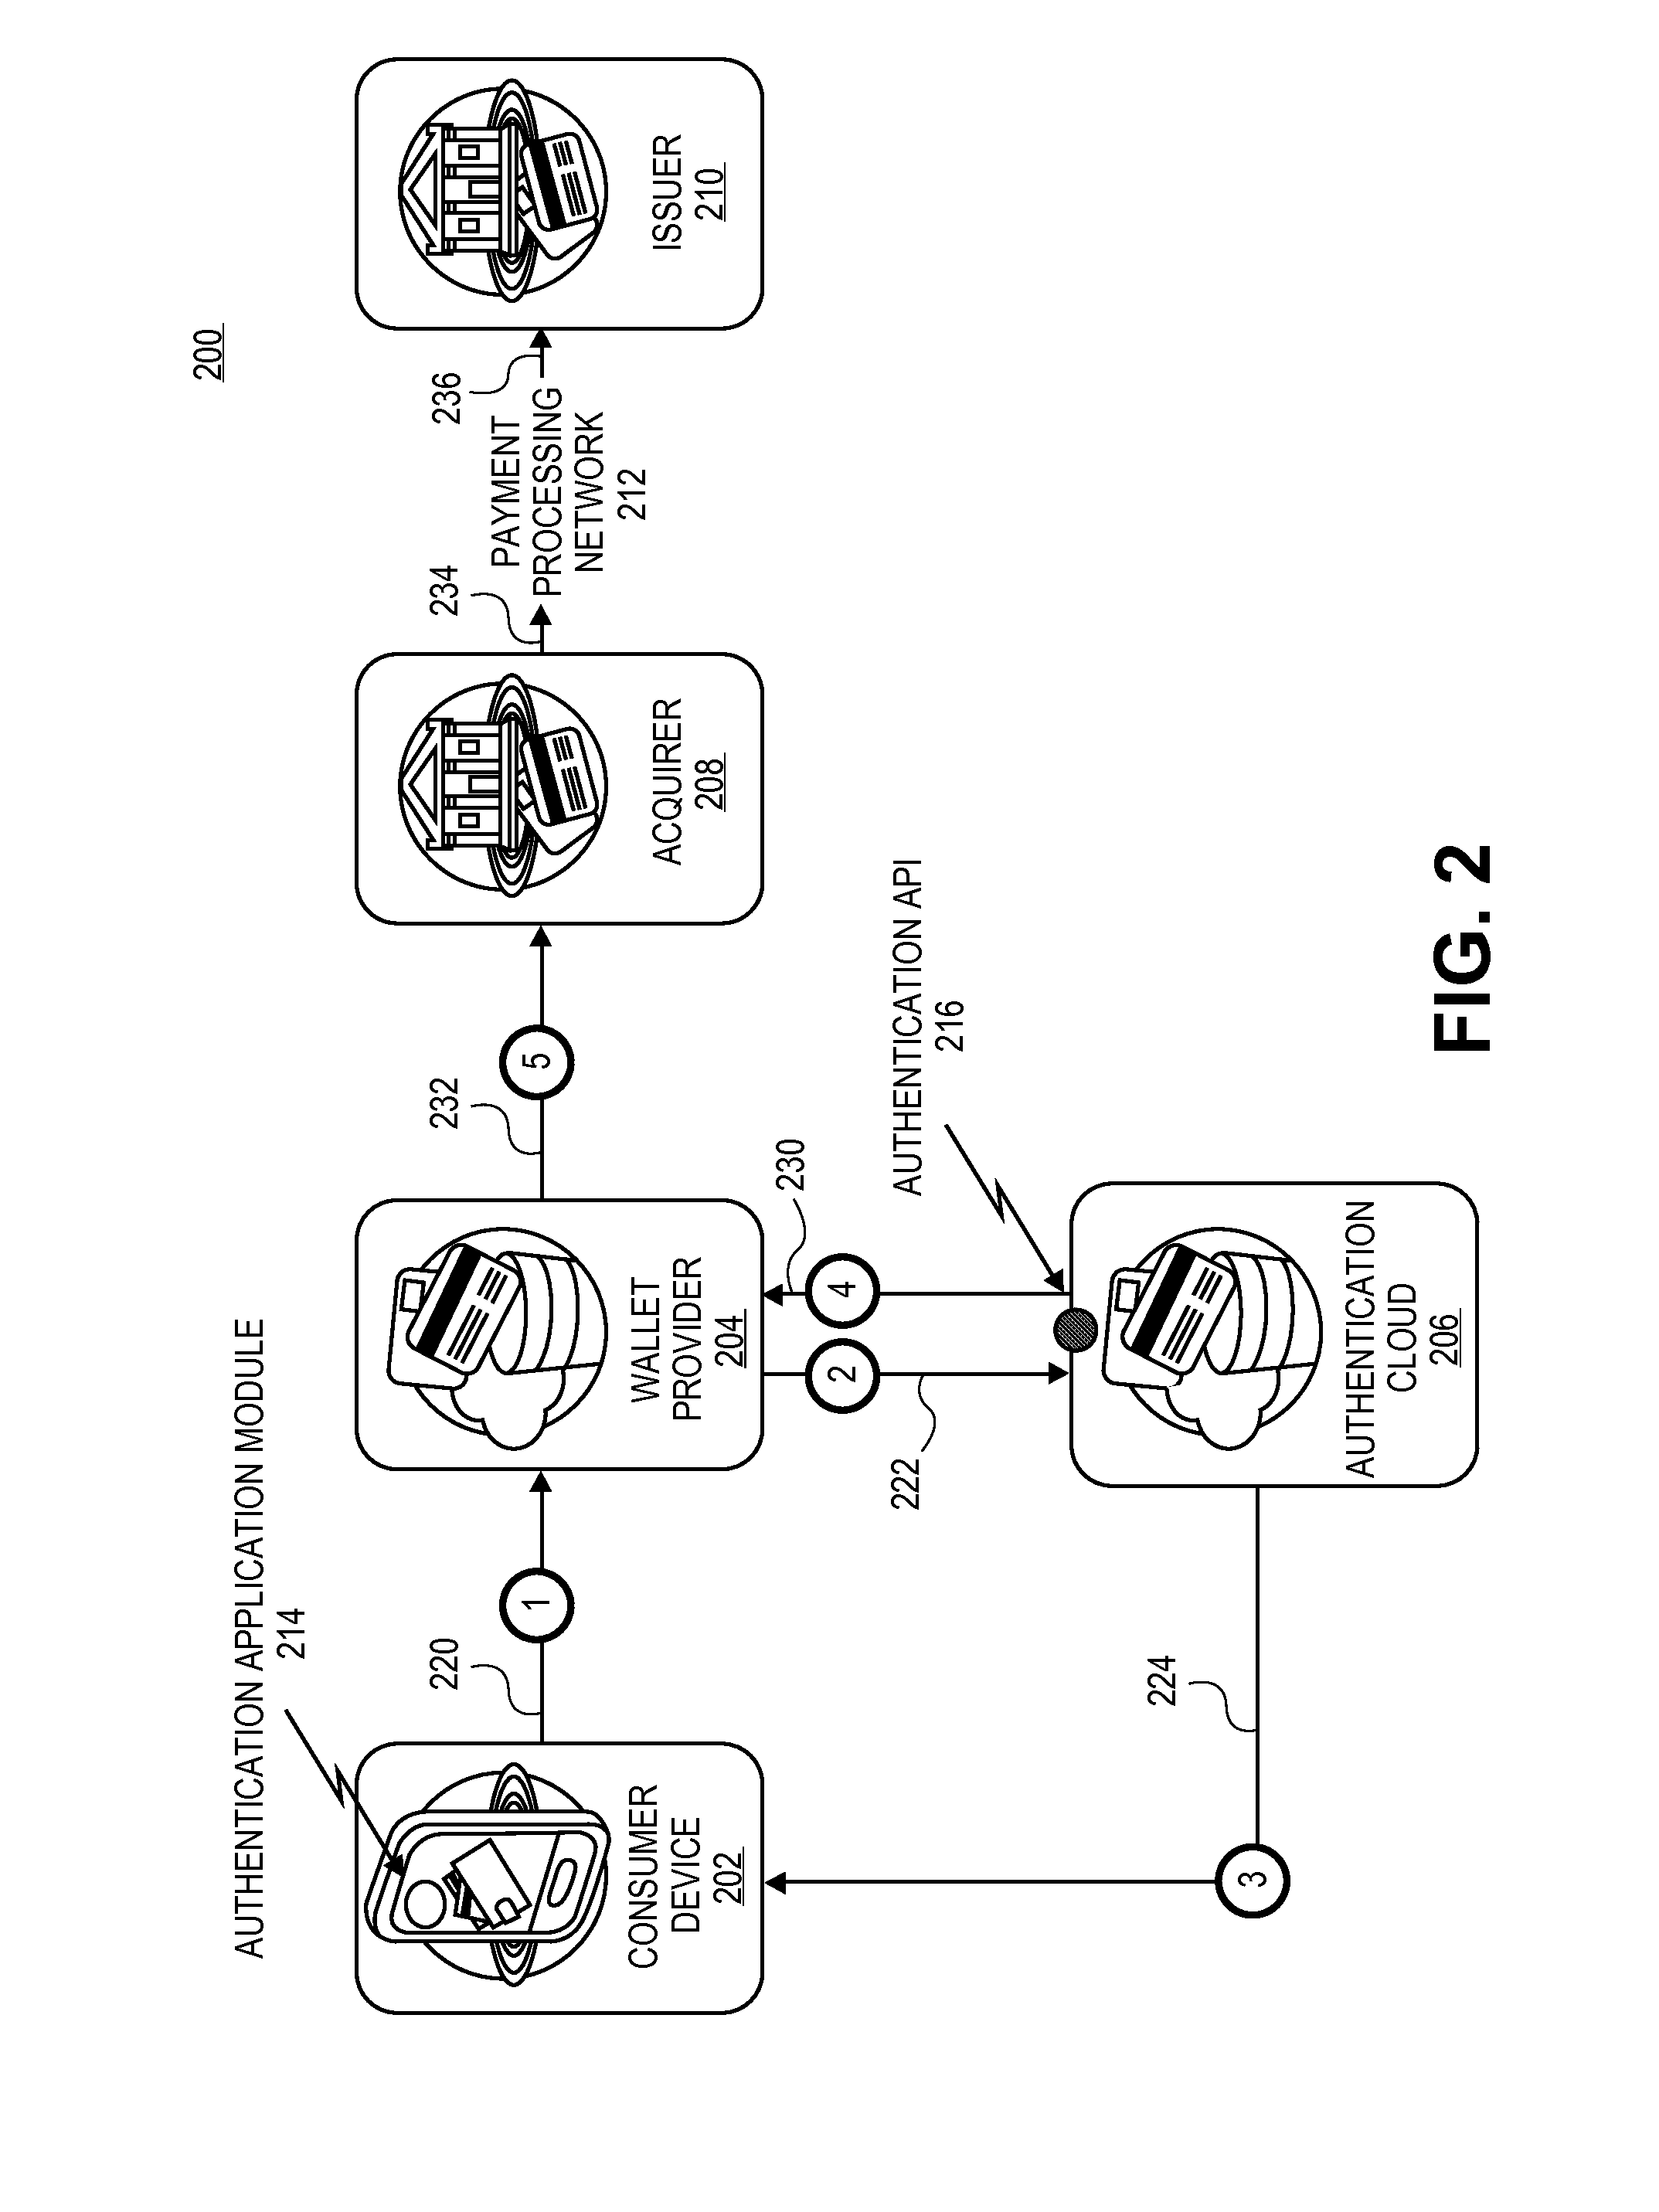 Authenticating Remote Transactions Using a Mobile Device